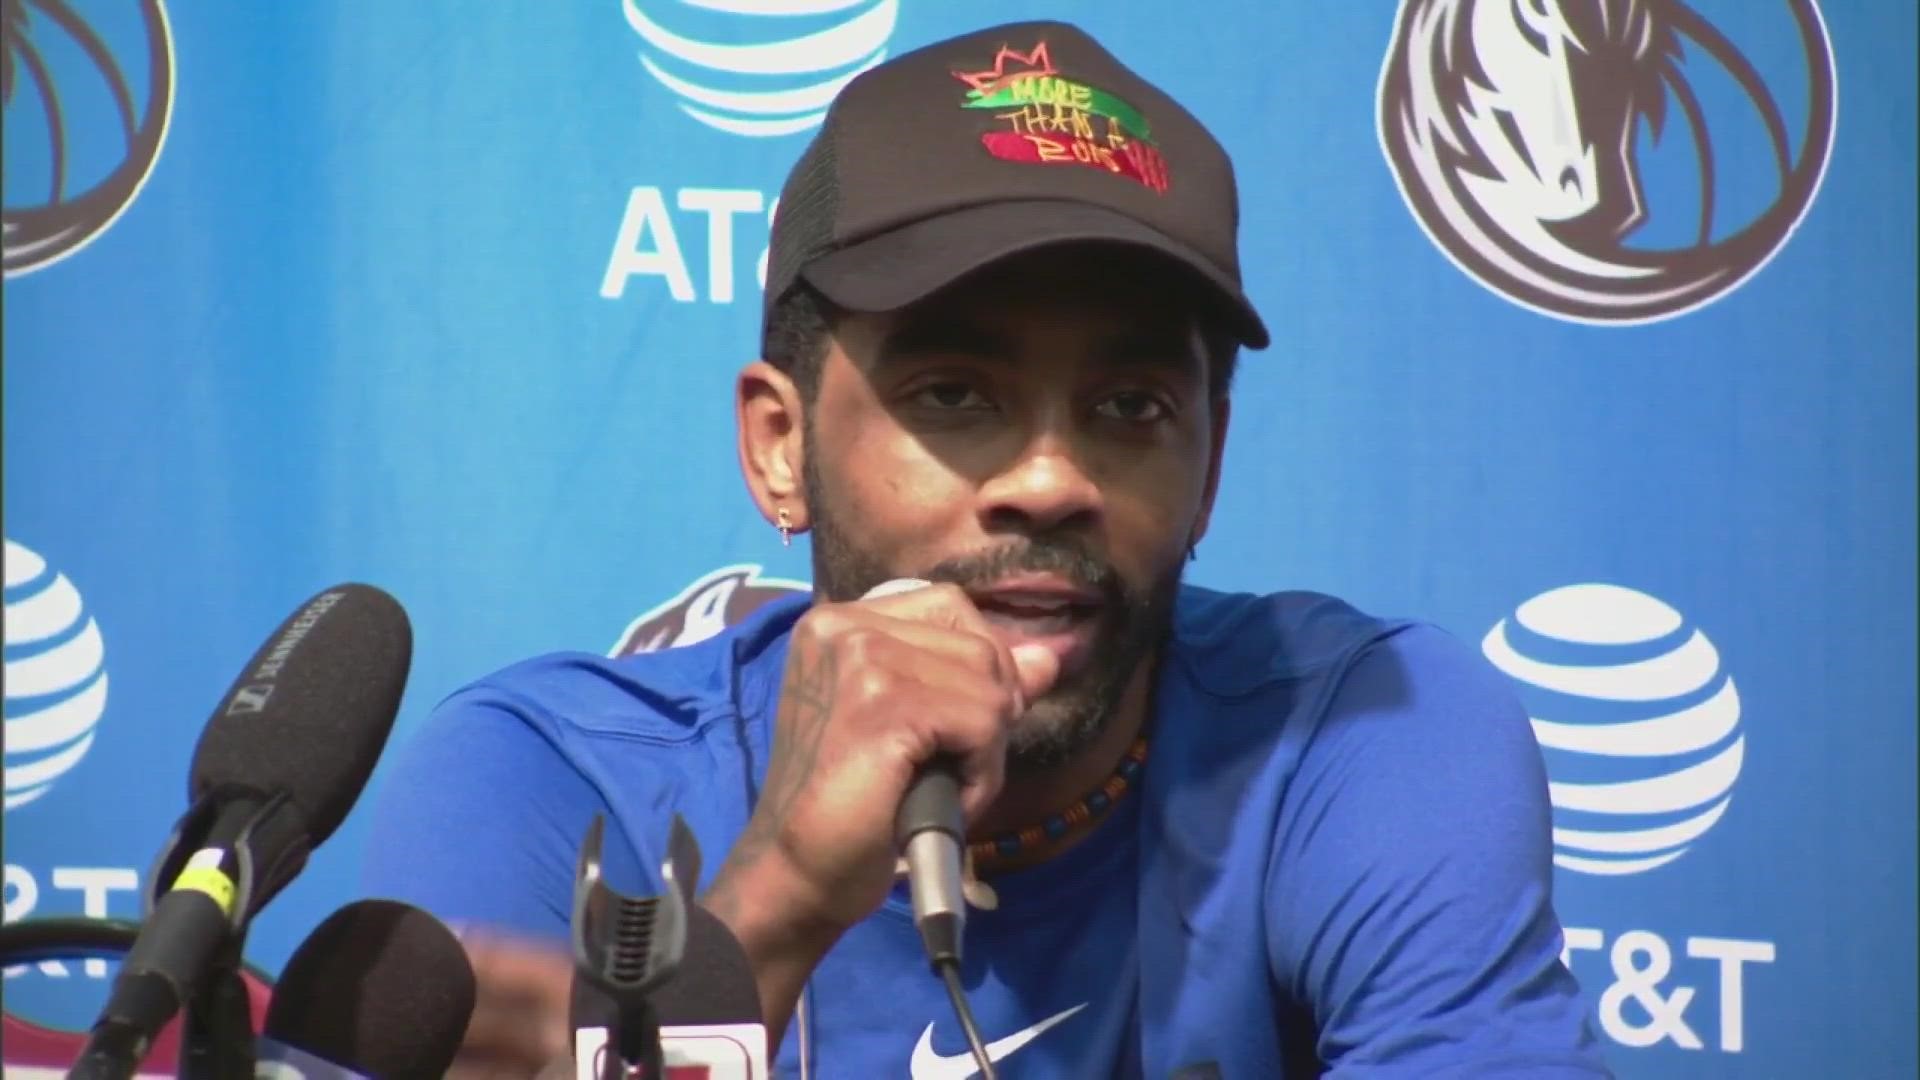 Kyrie Irving spoke to the media for the first time following his trade to the Dallas Mavericks.